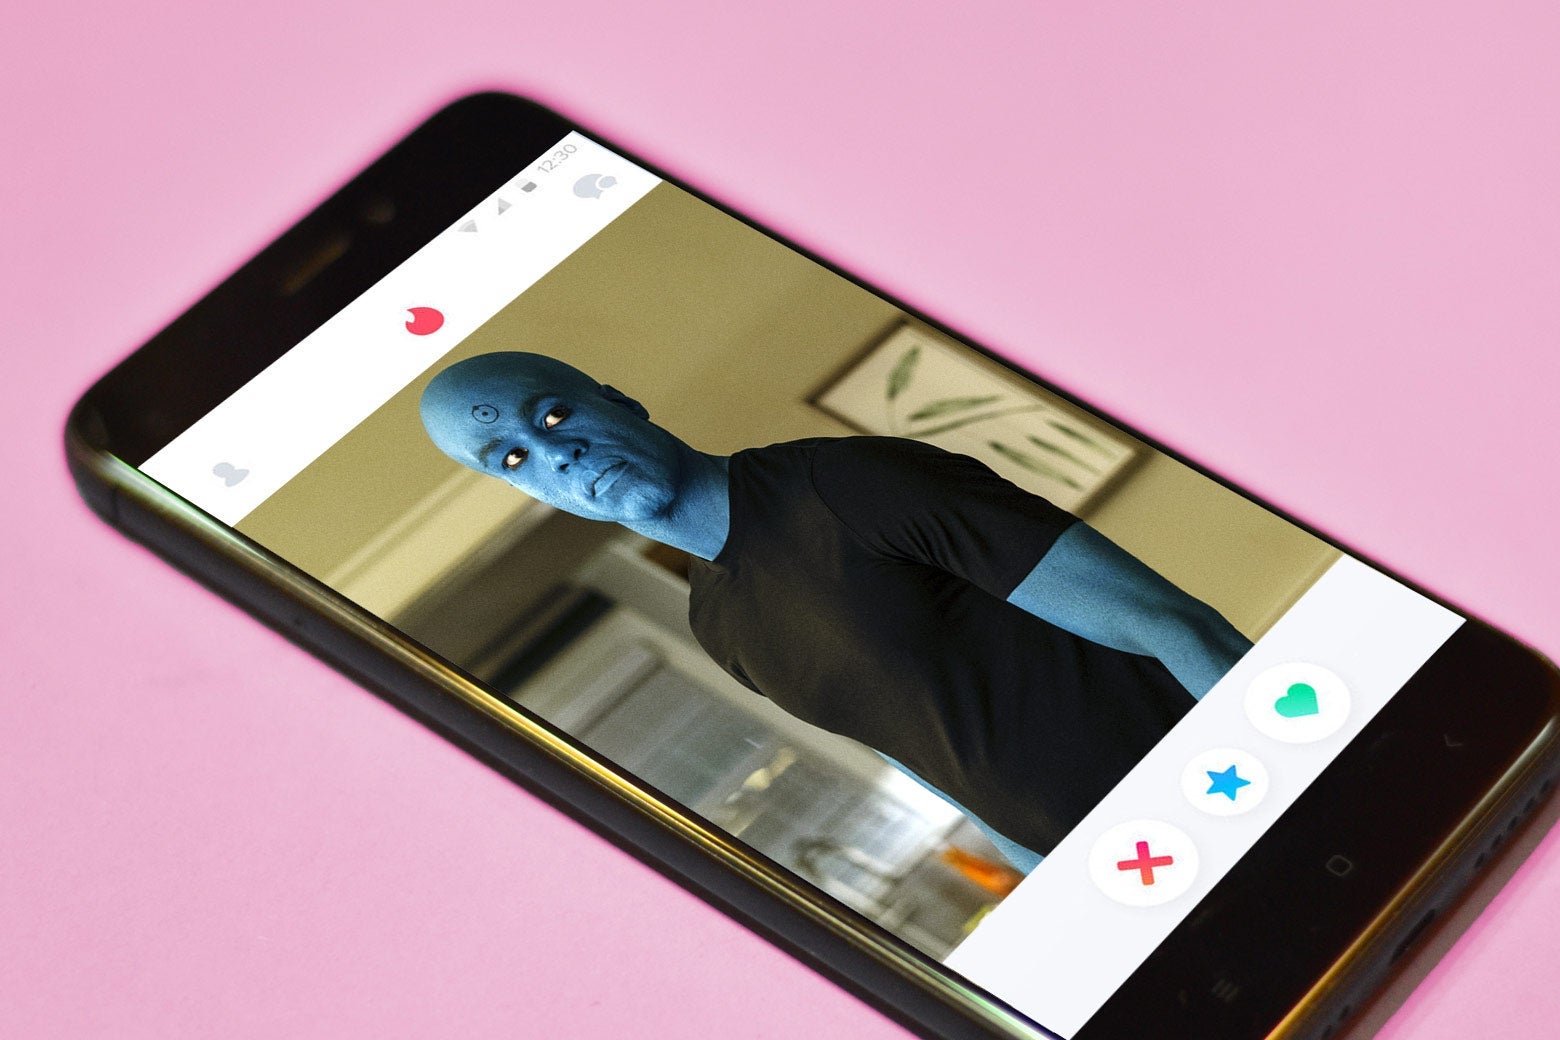 A phone screen with an imaginary Tinder profile for Doctor Manhattan on it.